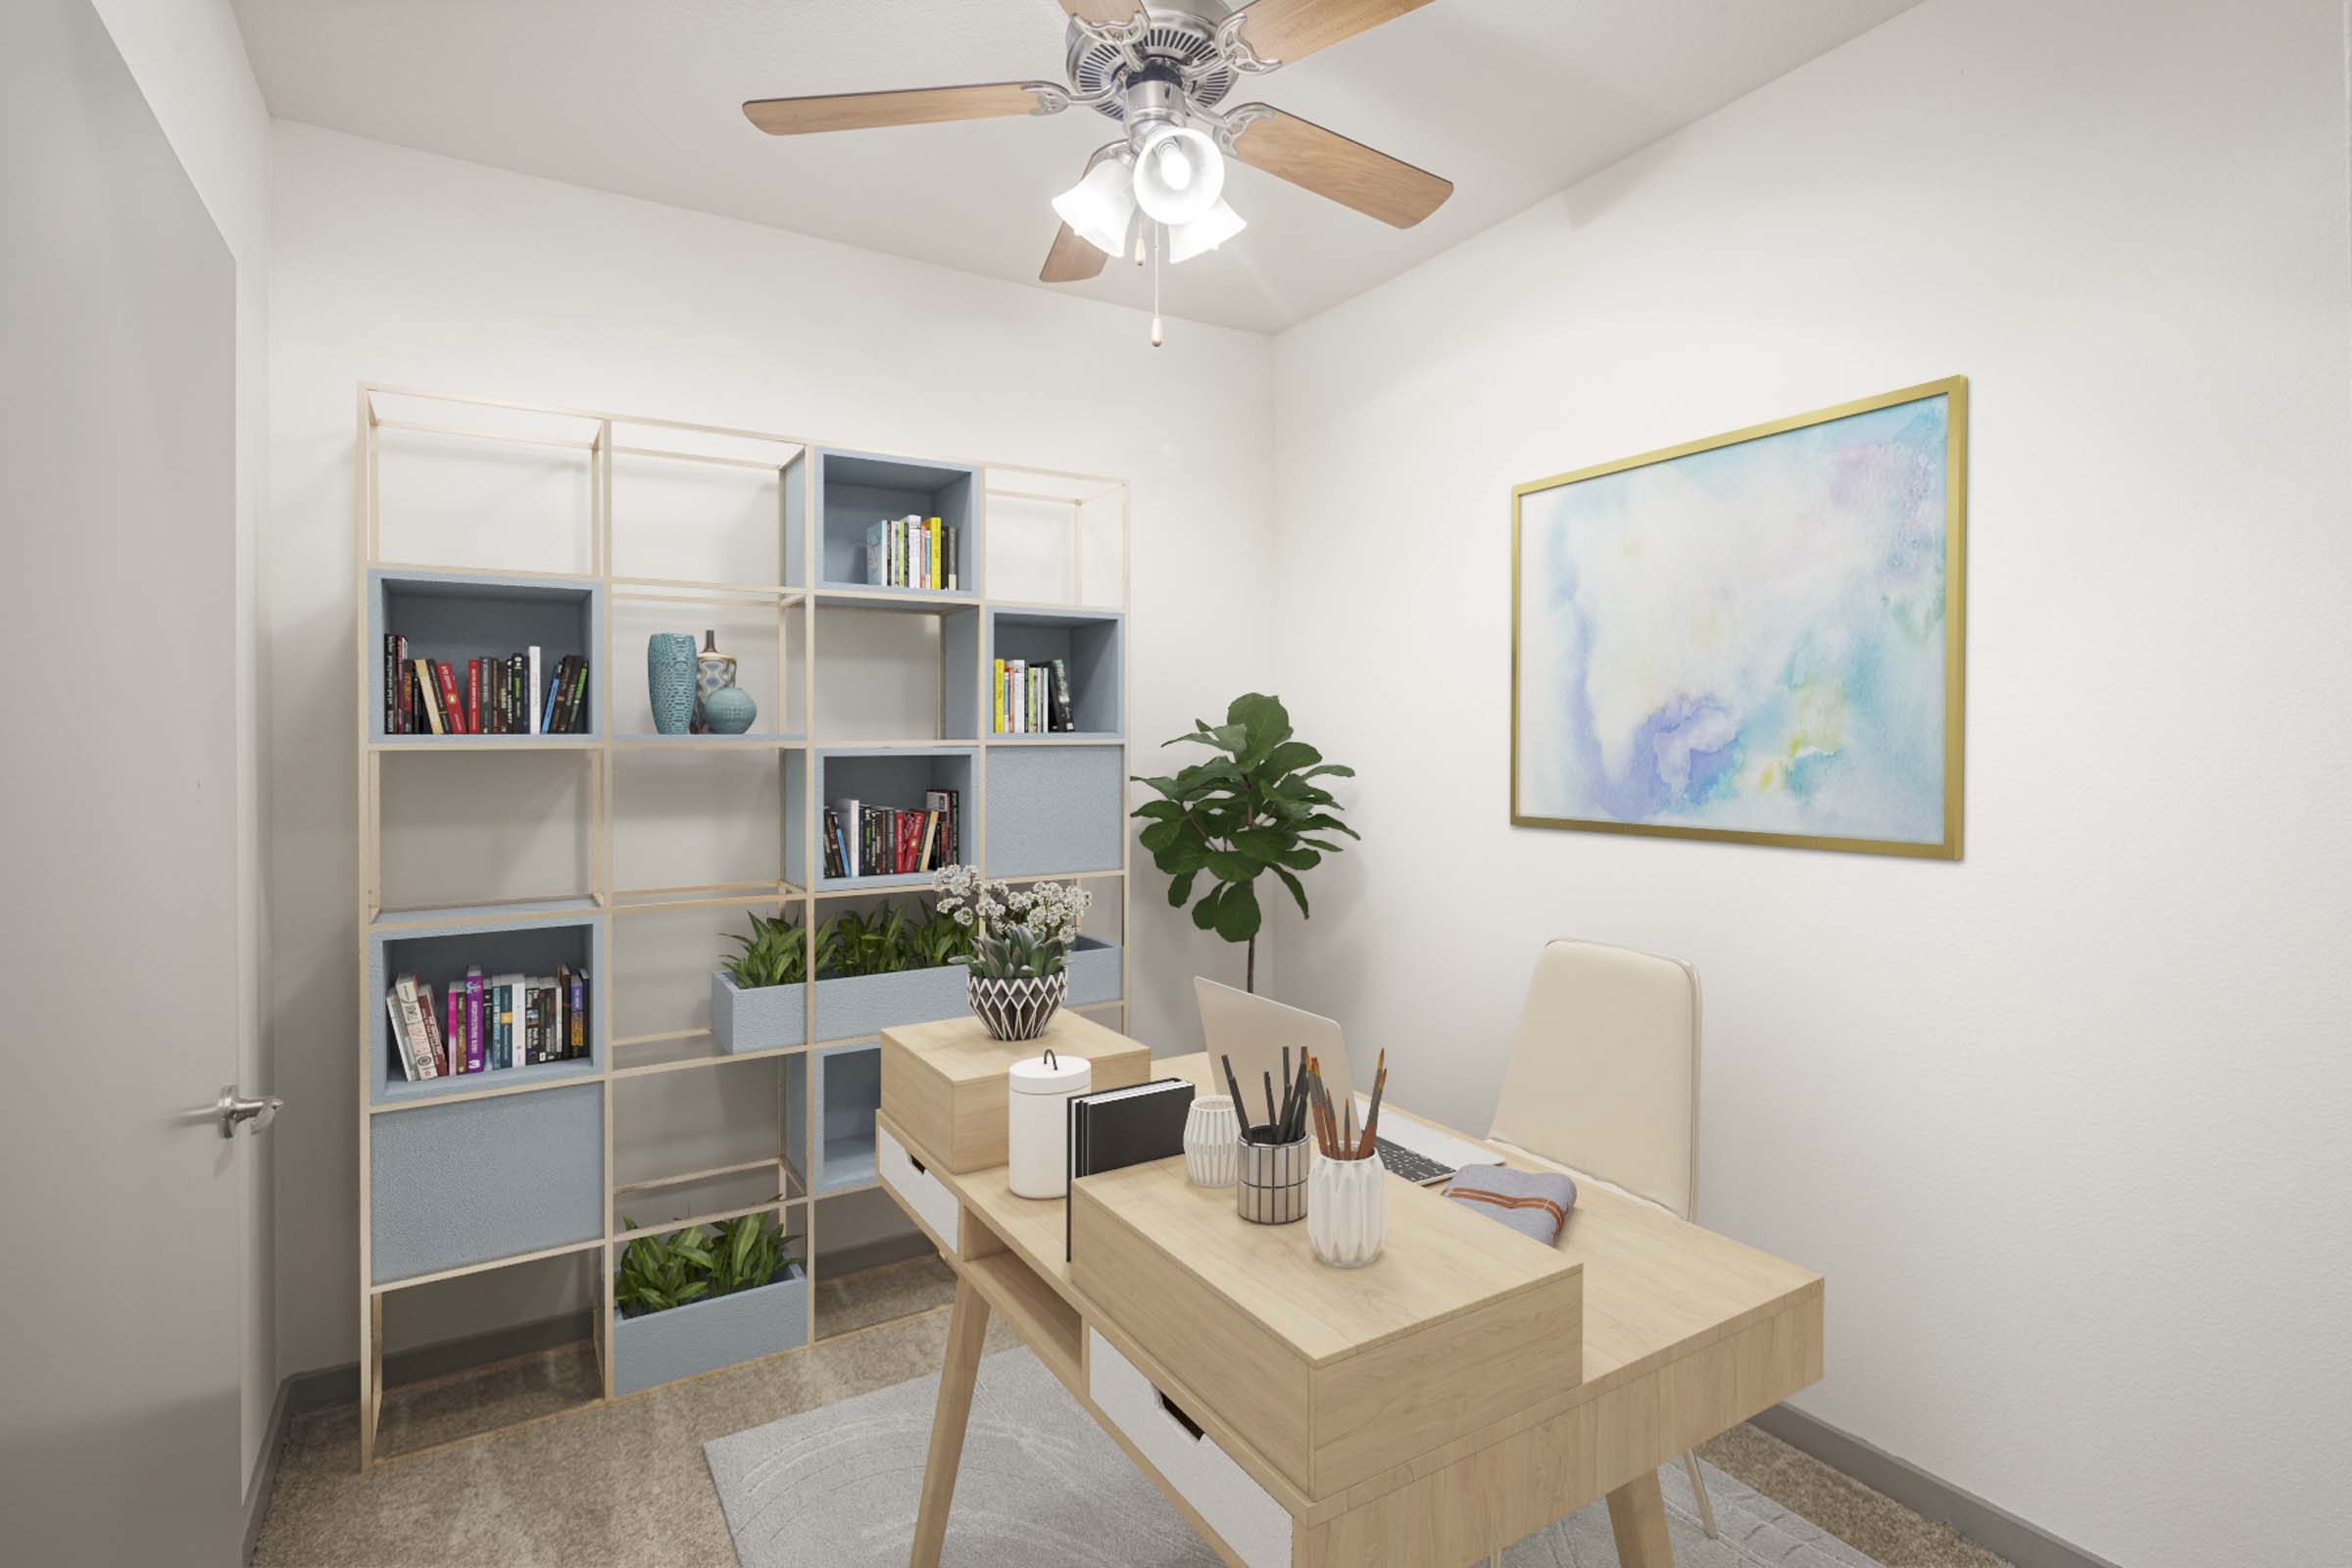 Study space to work from home with ceiling fan